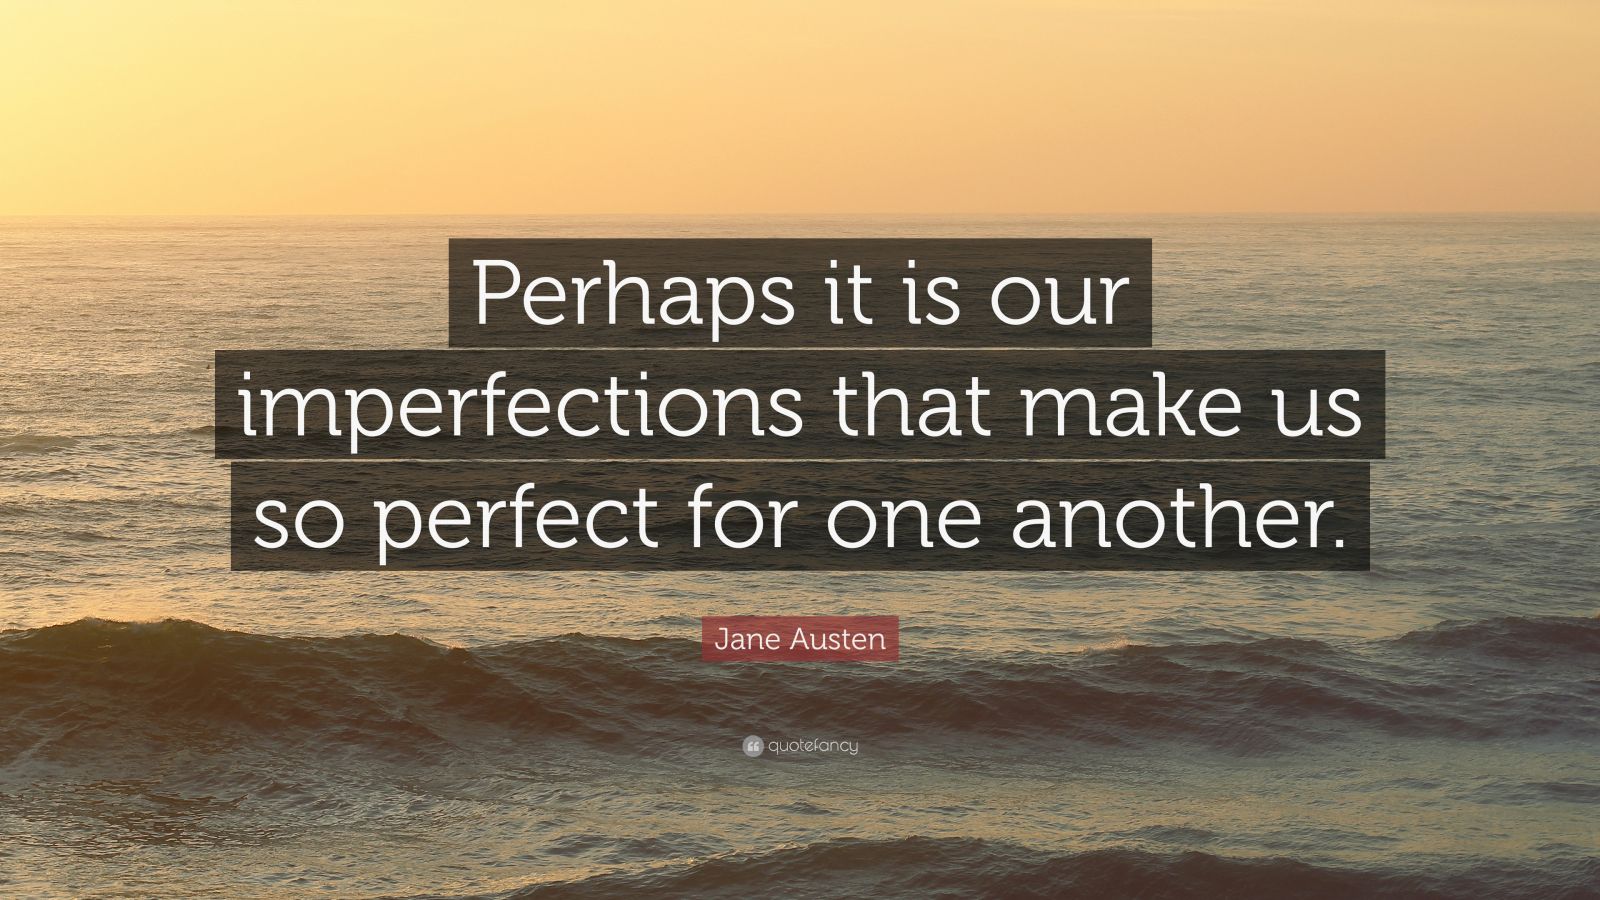 Jane Austen Quote: “Perhaps it is our imperfections that make us so